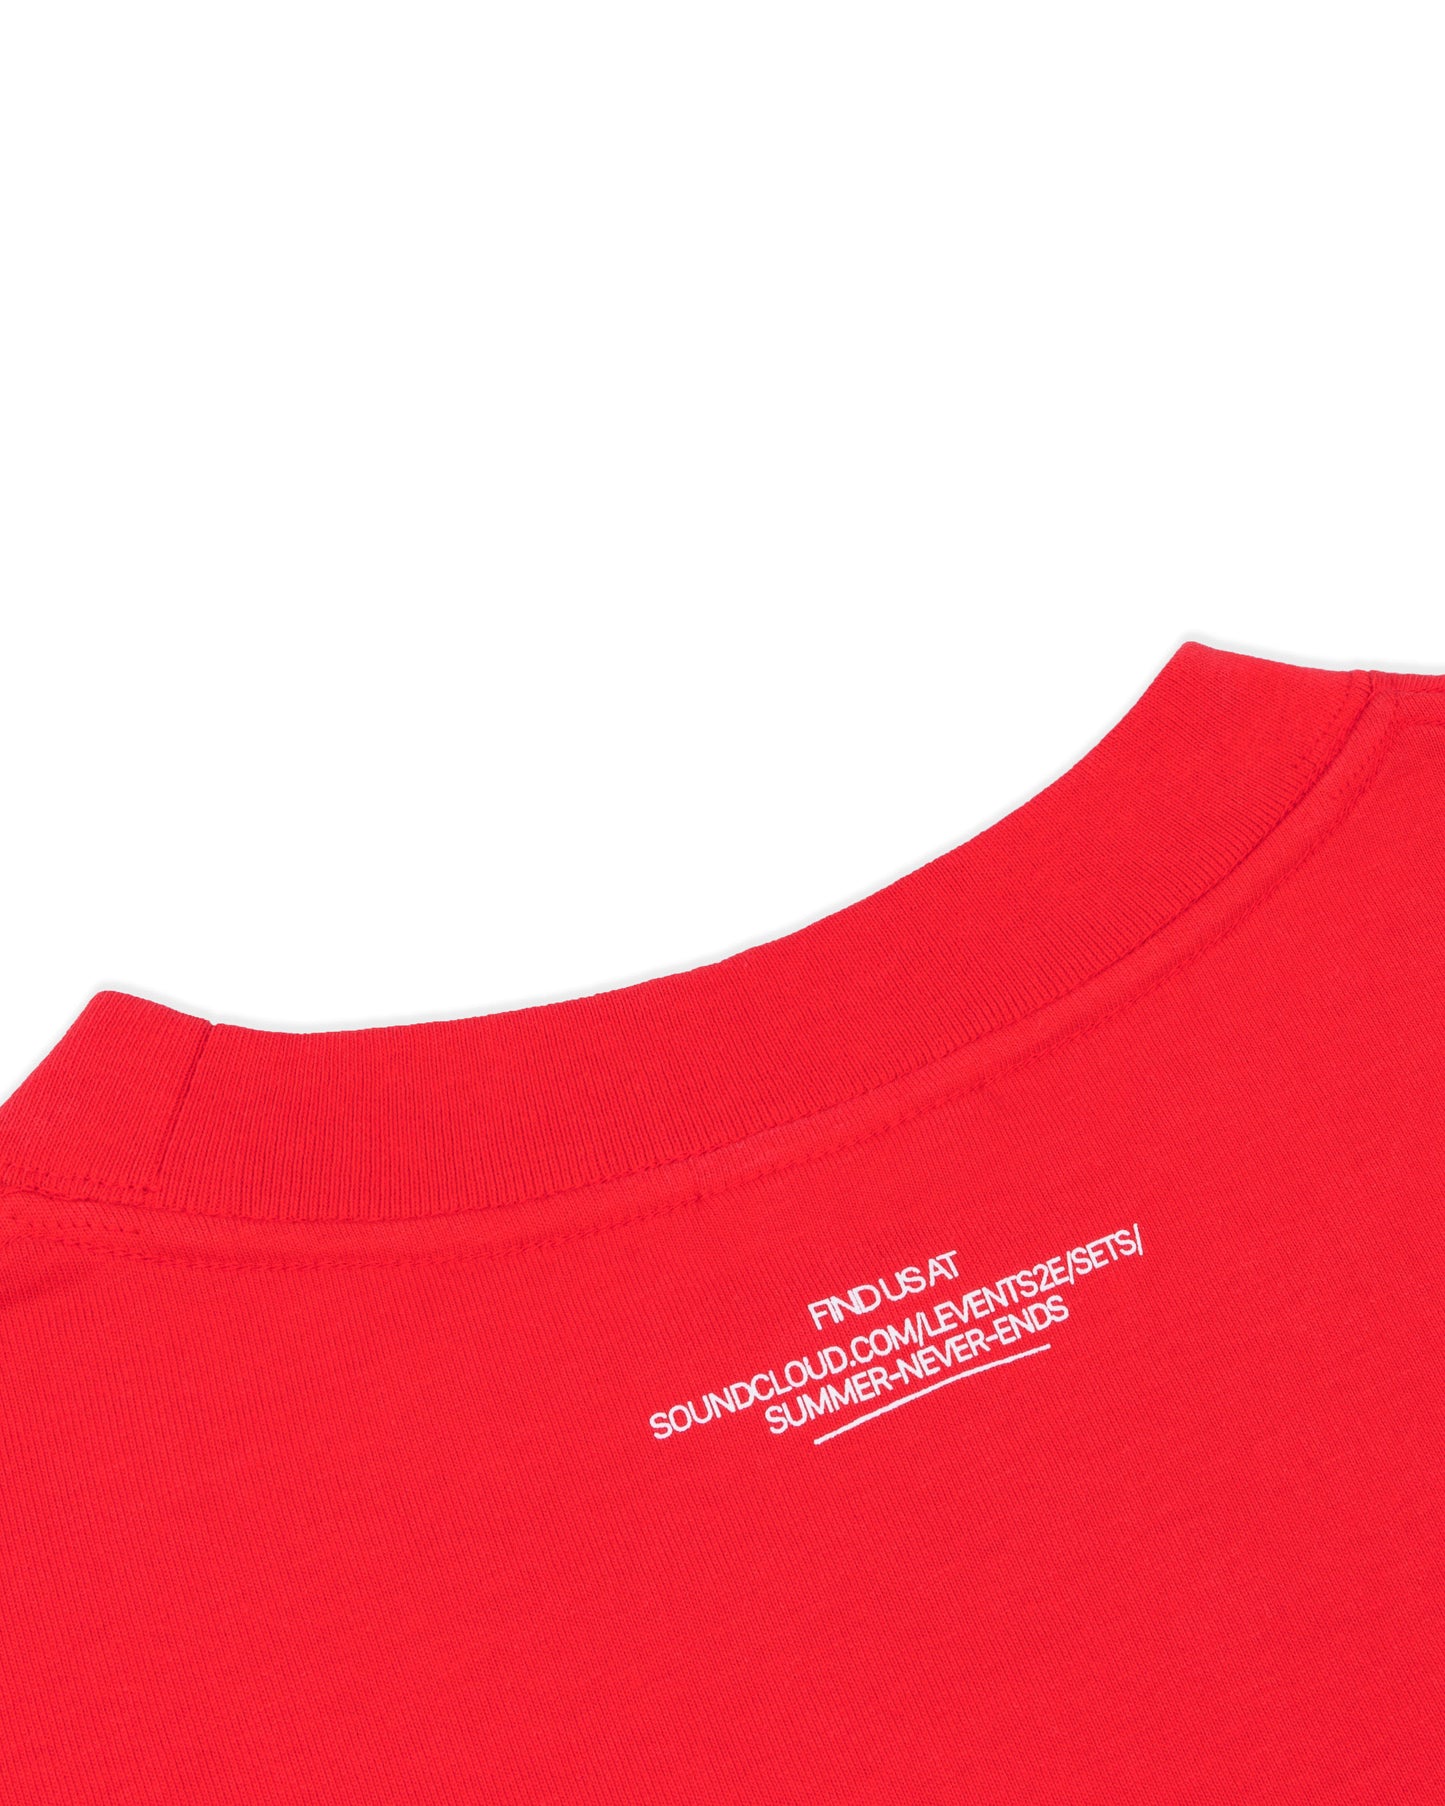 Levents® Summer Vibe Tee/ Red